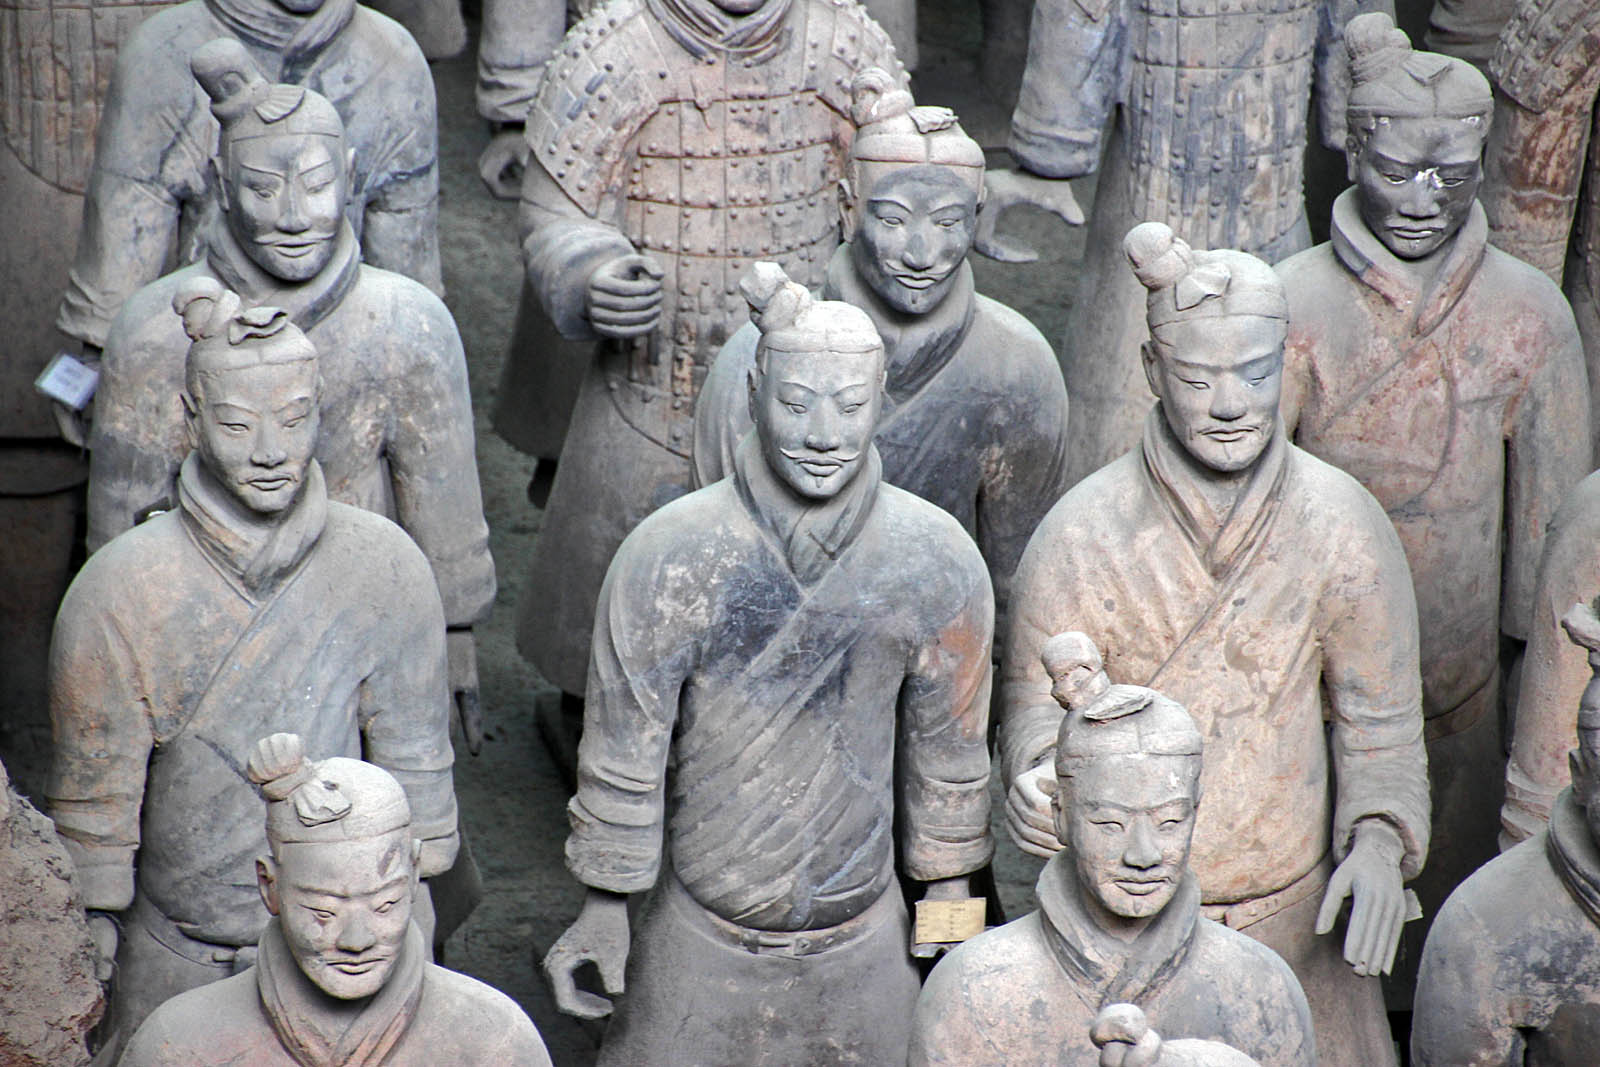 The famed terracotta soldiers at the mausoleum of Qin Shi Huangdi.